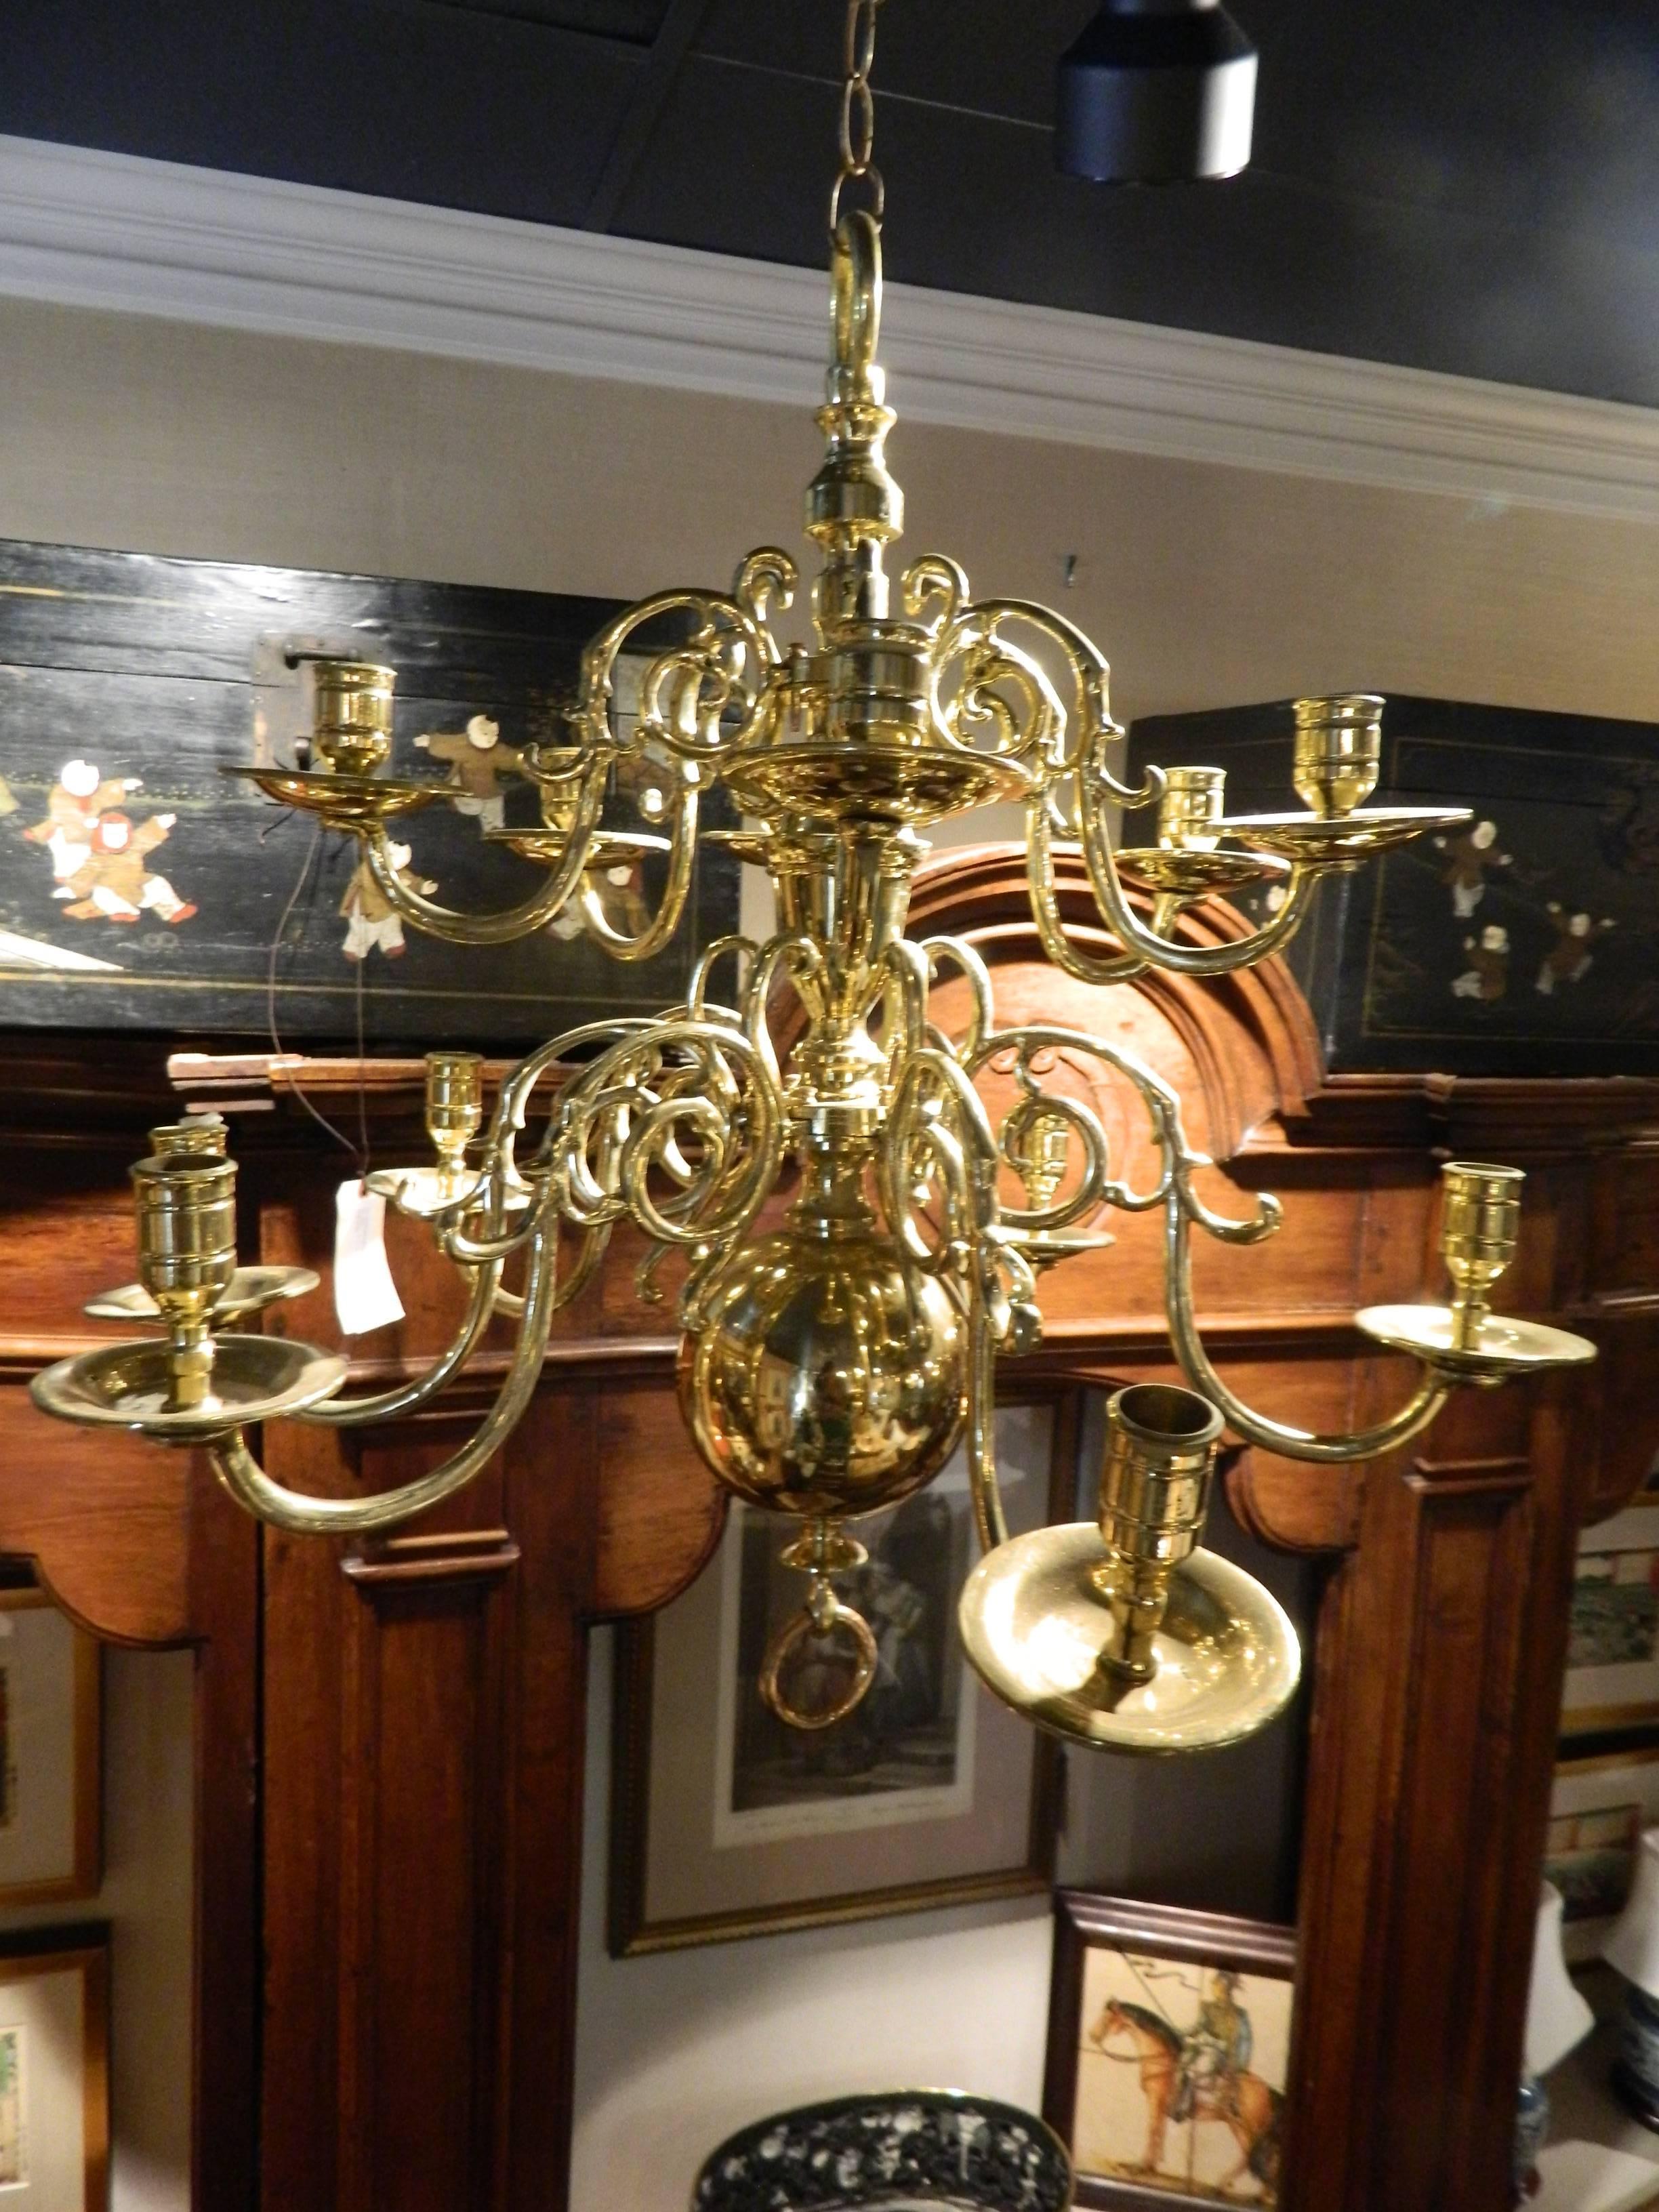 French Polished Brass Two-Tier Ball Chandelier, 19th Century For Sale 2